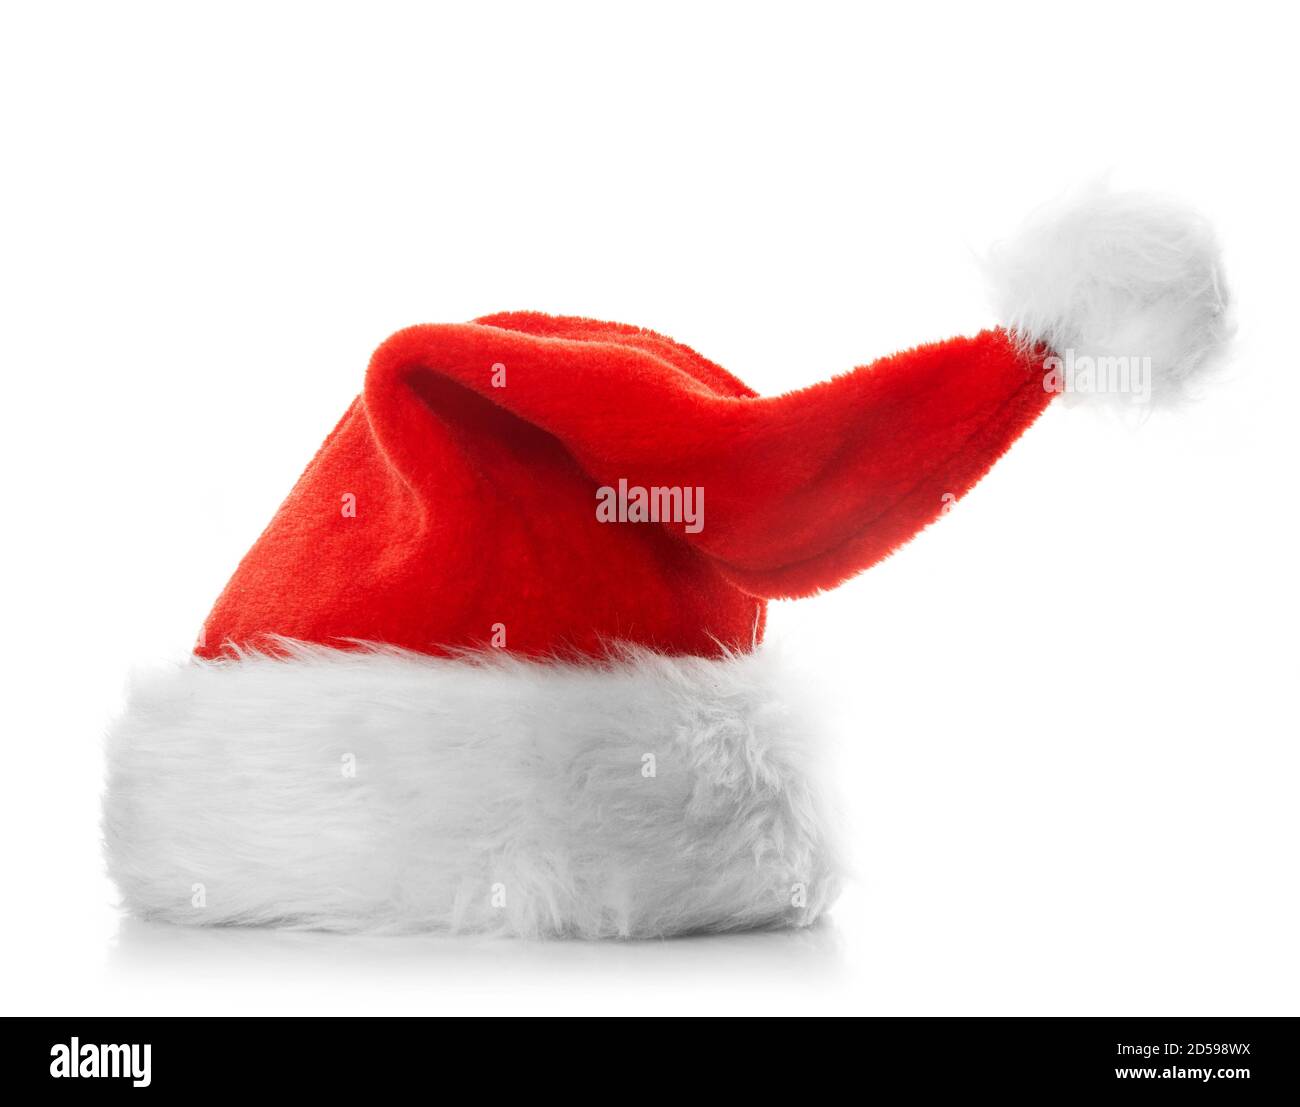 Santa Claus red hat isolated on white background Stock Photo